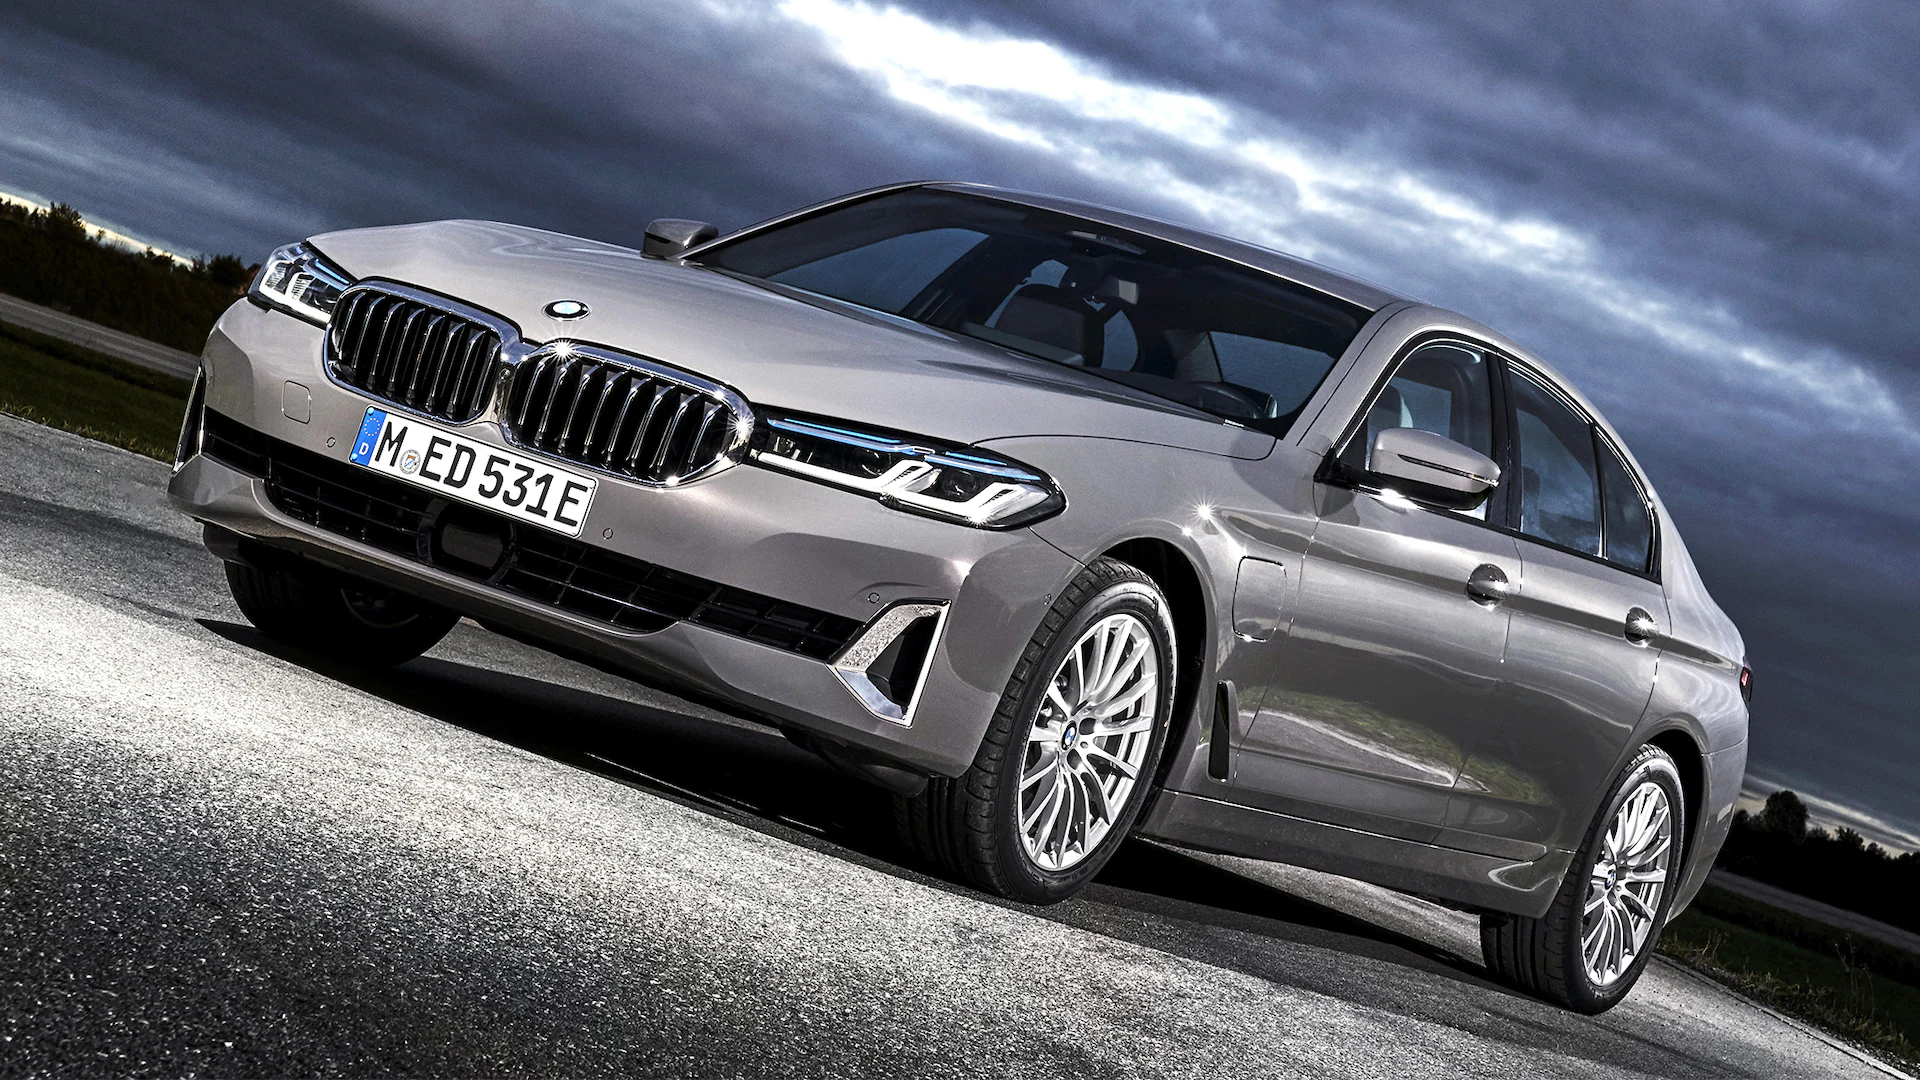 F10 BMW 5 Series sales exceed two million mark 